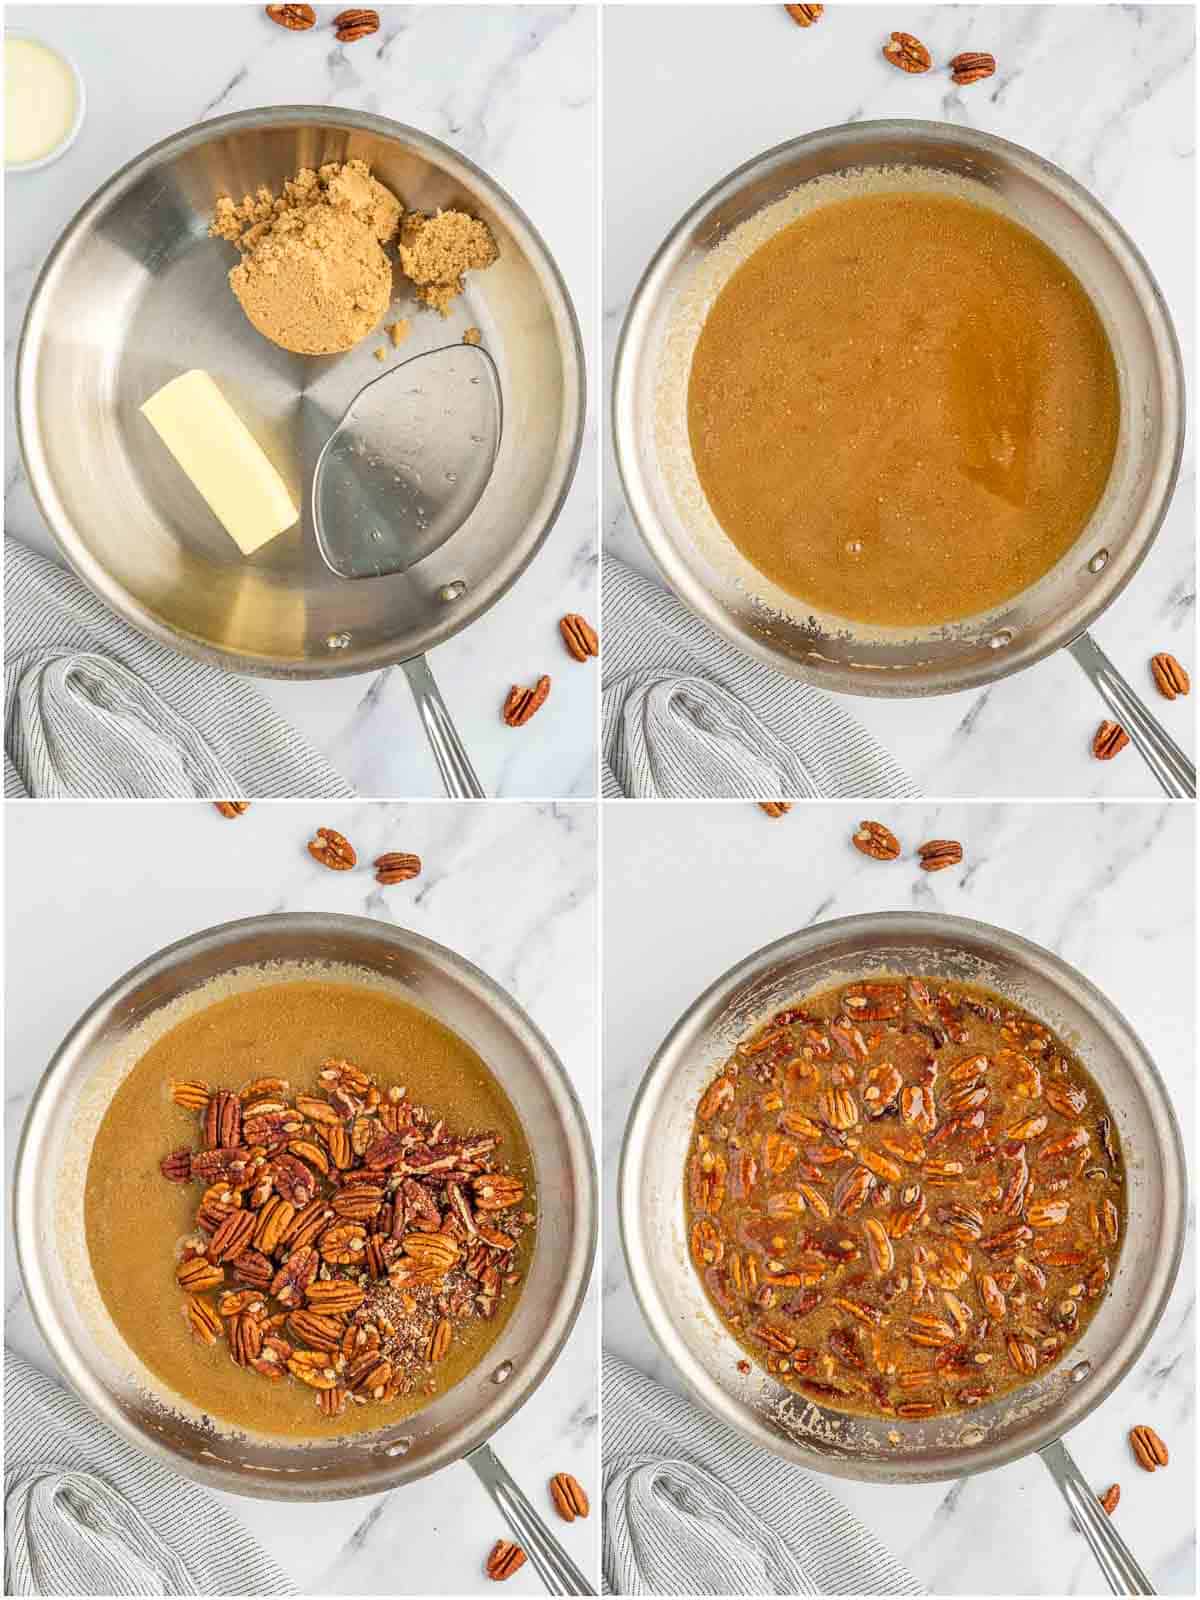 Process of how to make the pecan topping for cheesecake.